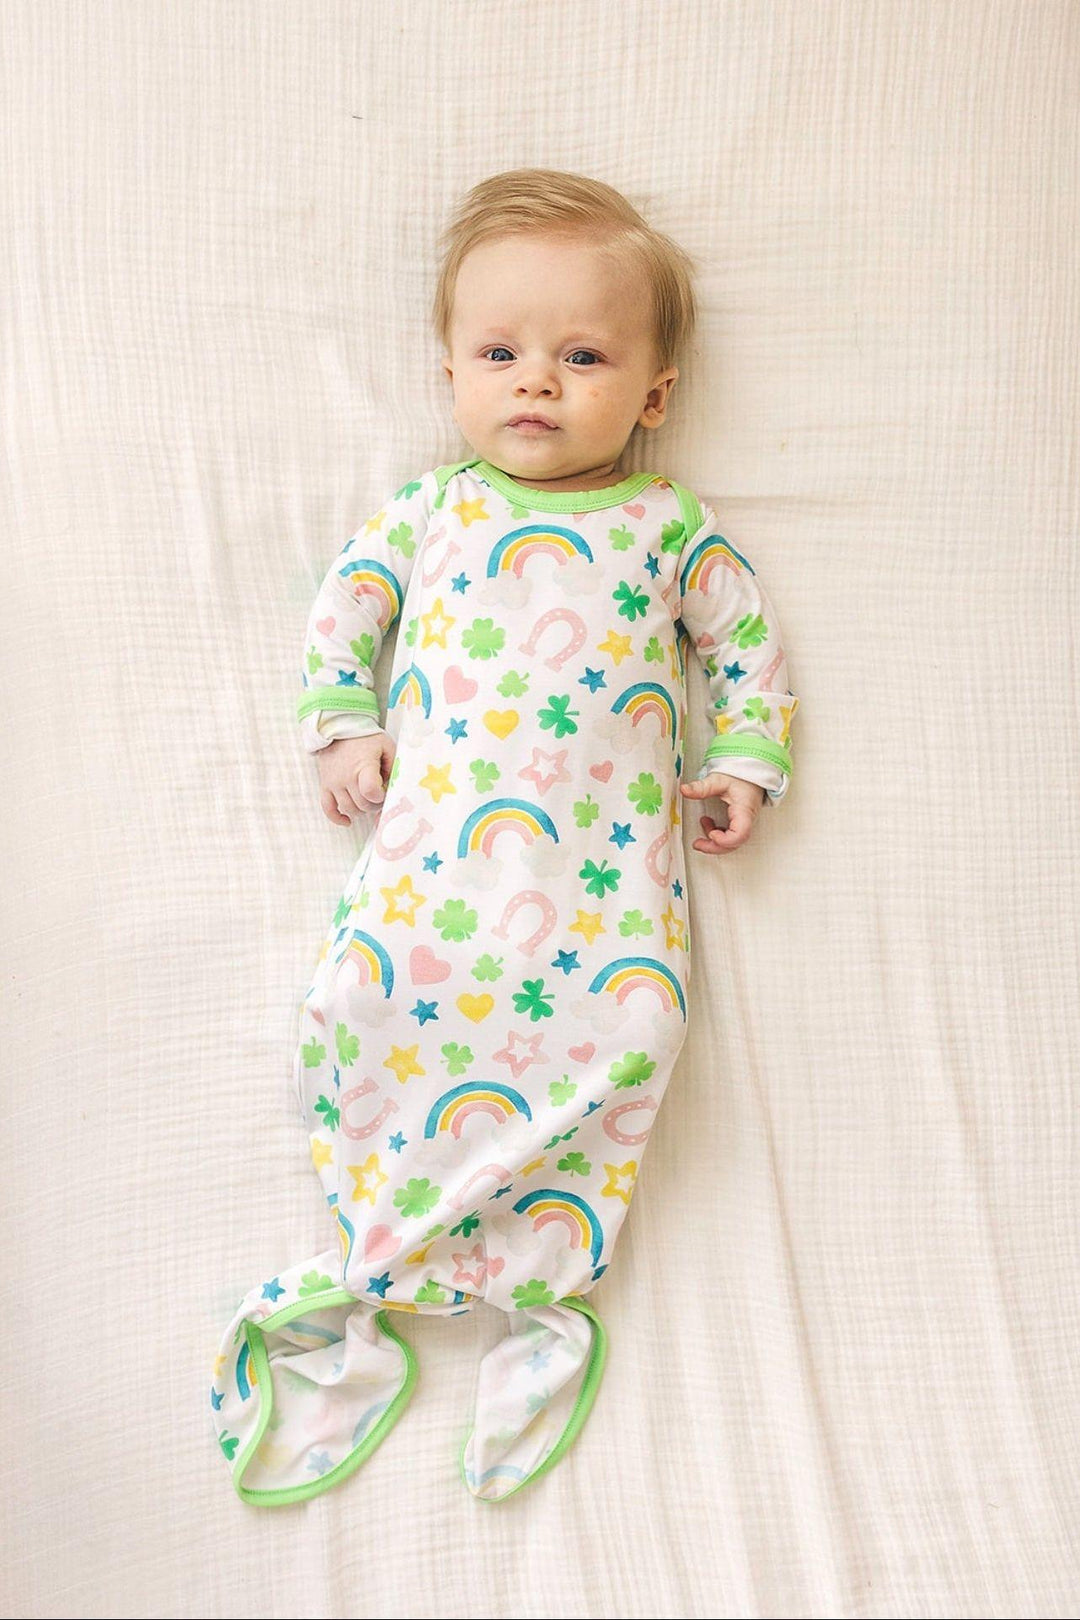 Newborn Bamboo Knotted Gown - Shamrocks & Rainbows, for St. Patrick's & Rainbow Babies - Sophia Rose Children's Boutique